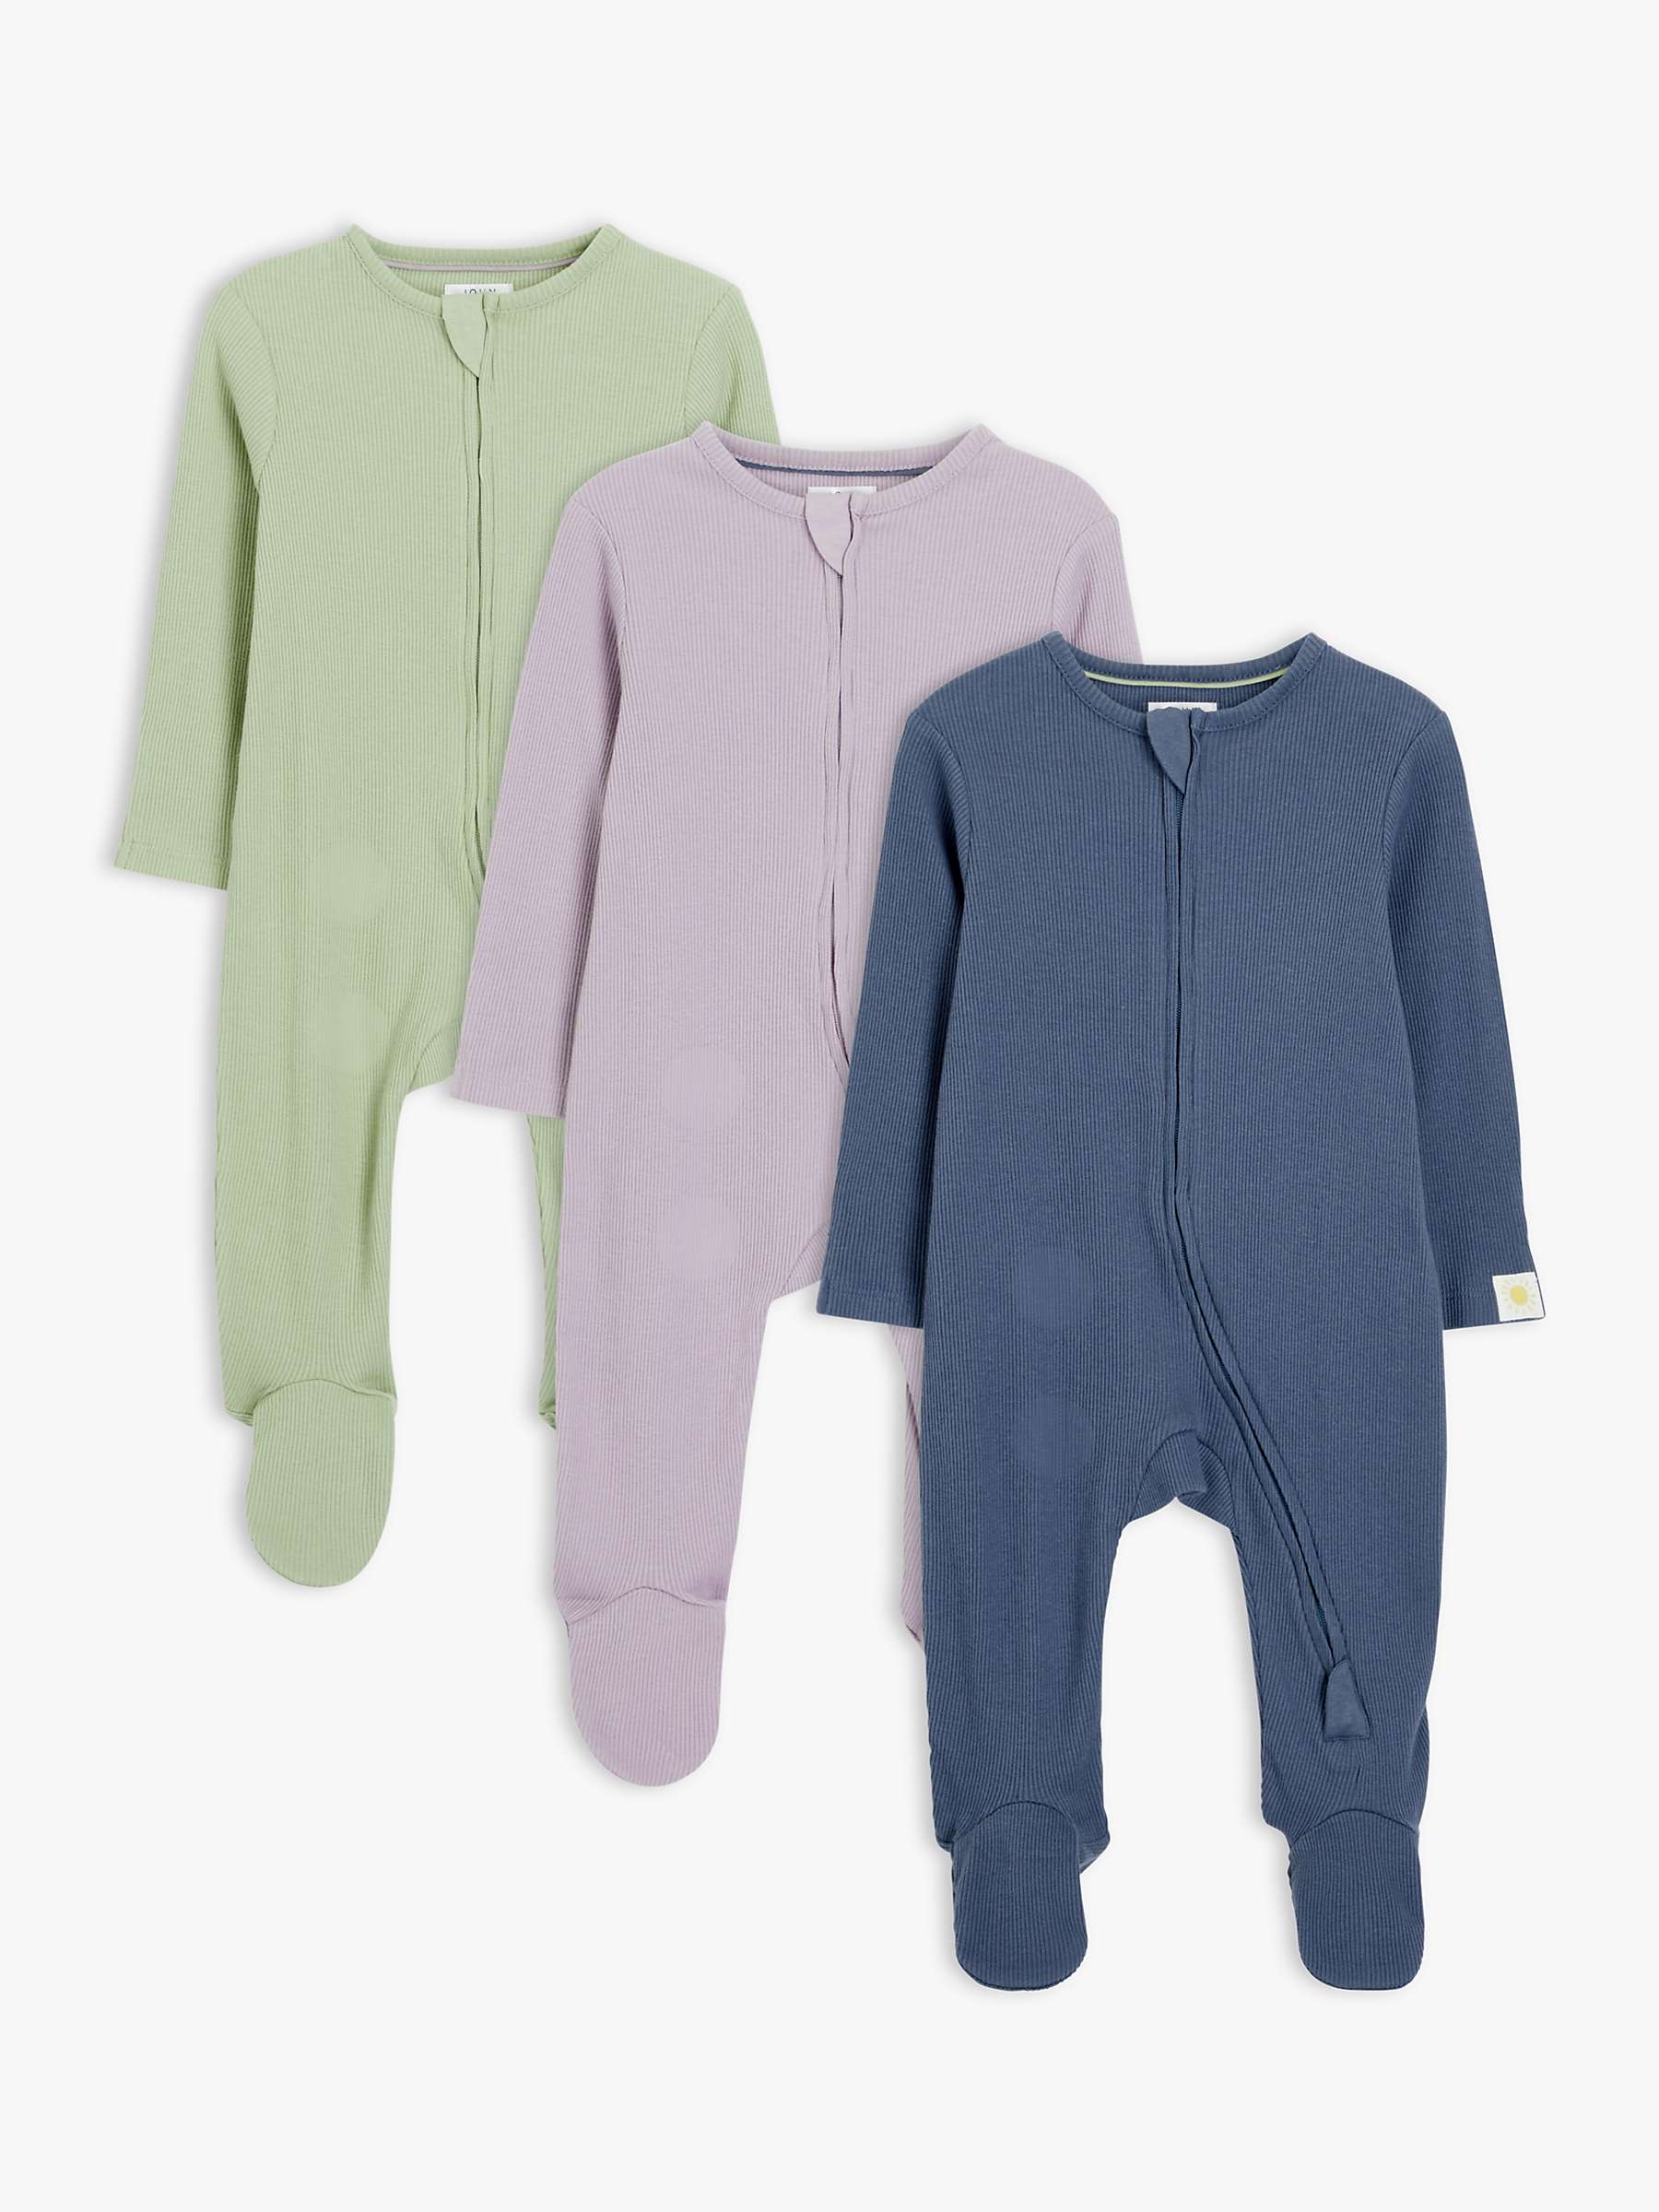 Buy John Lewis Baby GOTS Organic Cotton Ribbed Two-Way Zip Sleepsuit, Pack of 3 Online at johnlewis.com